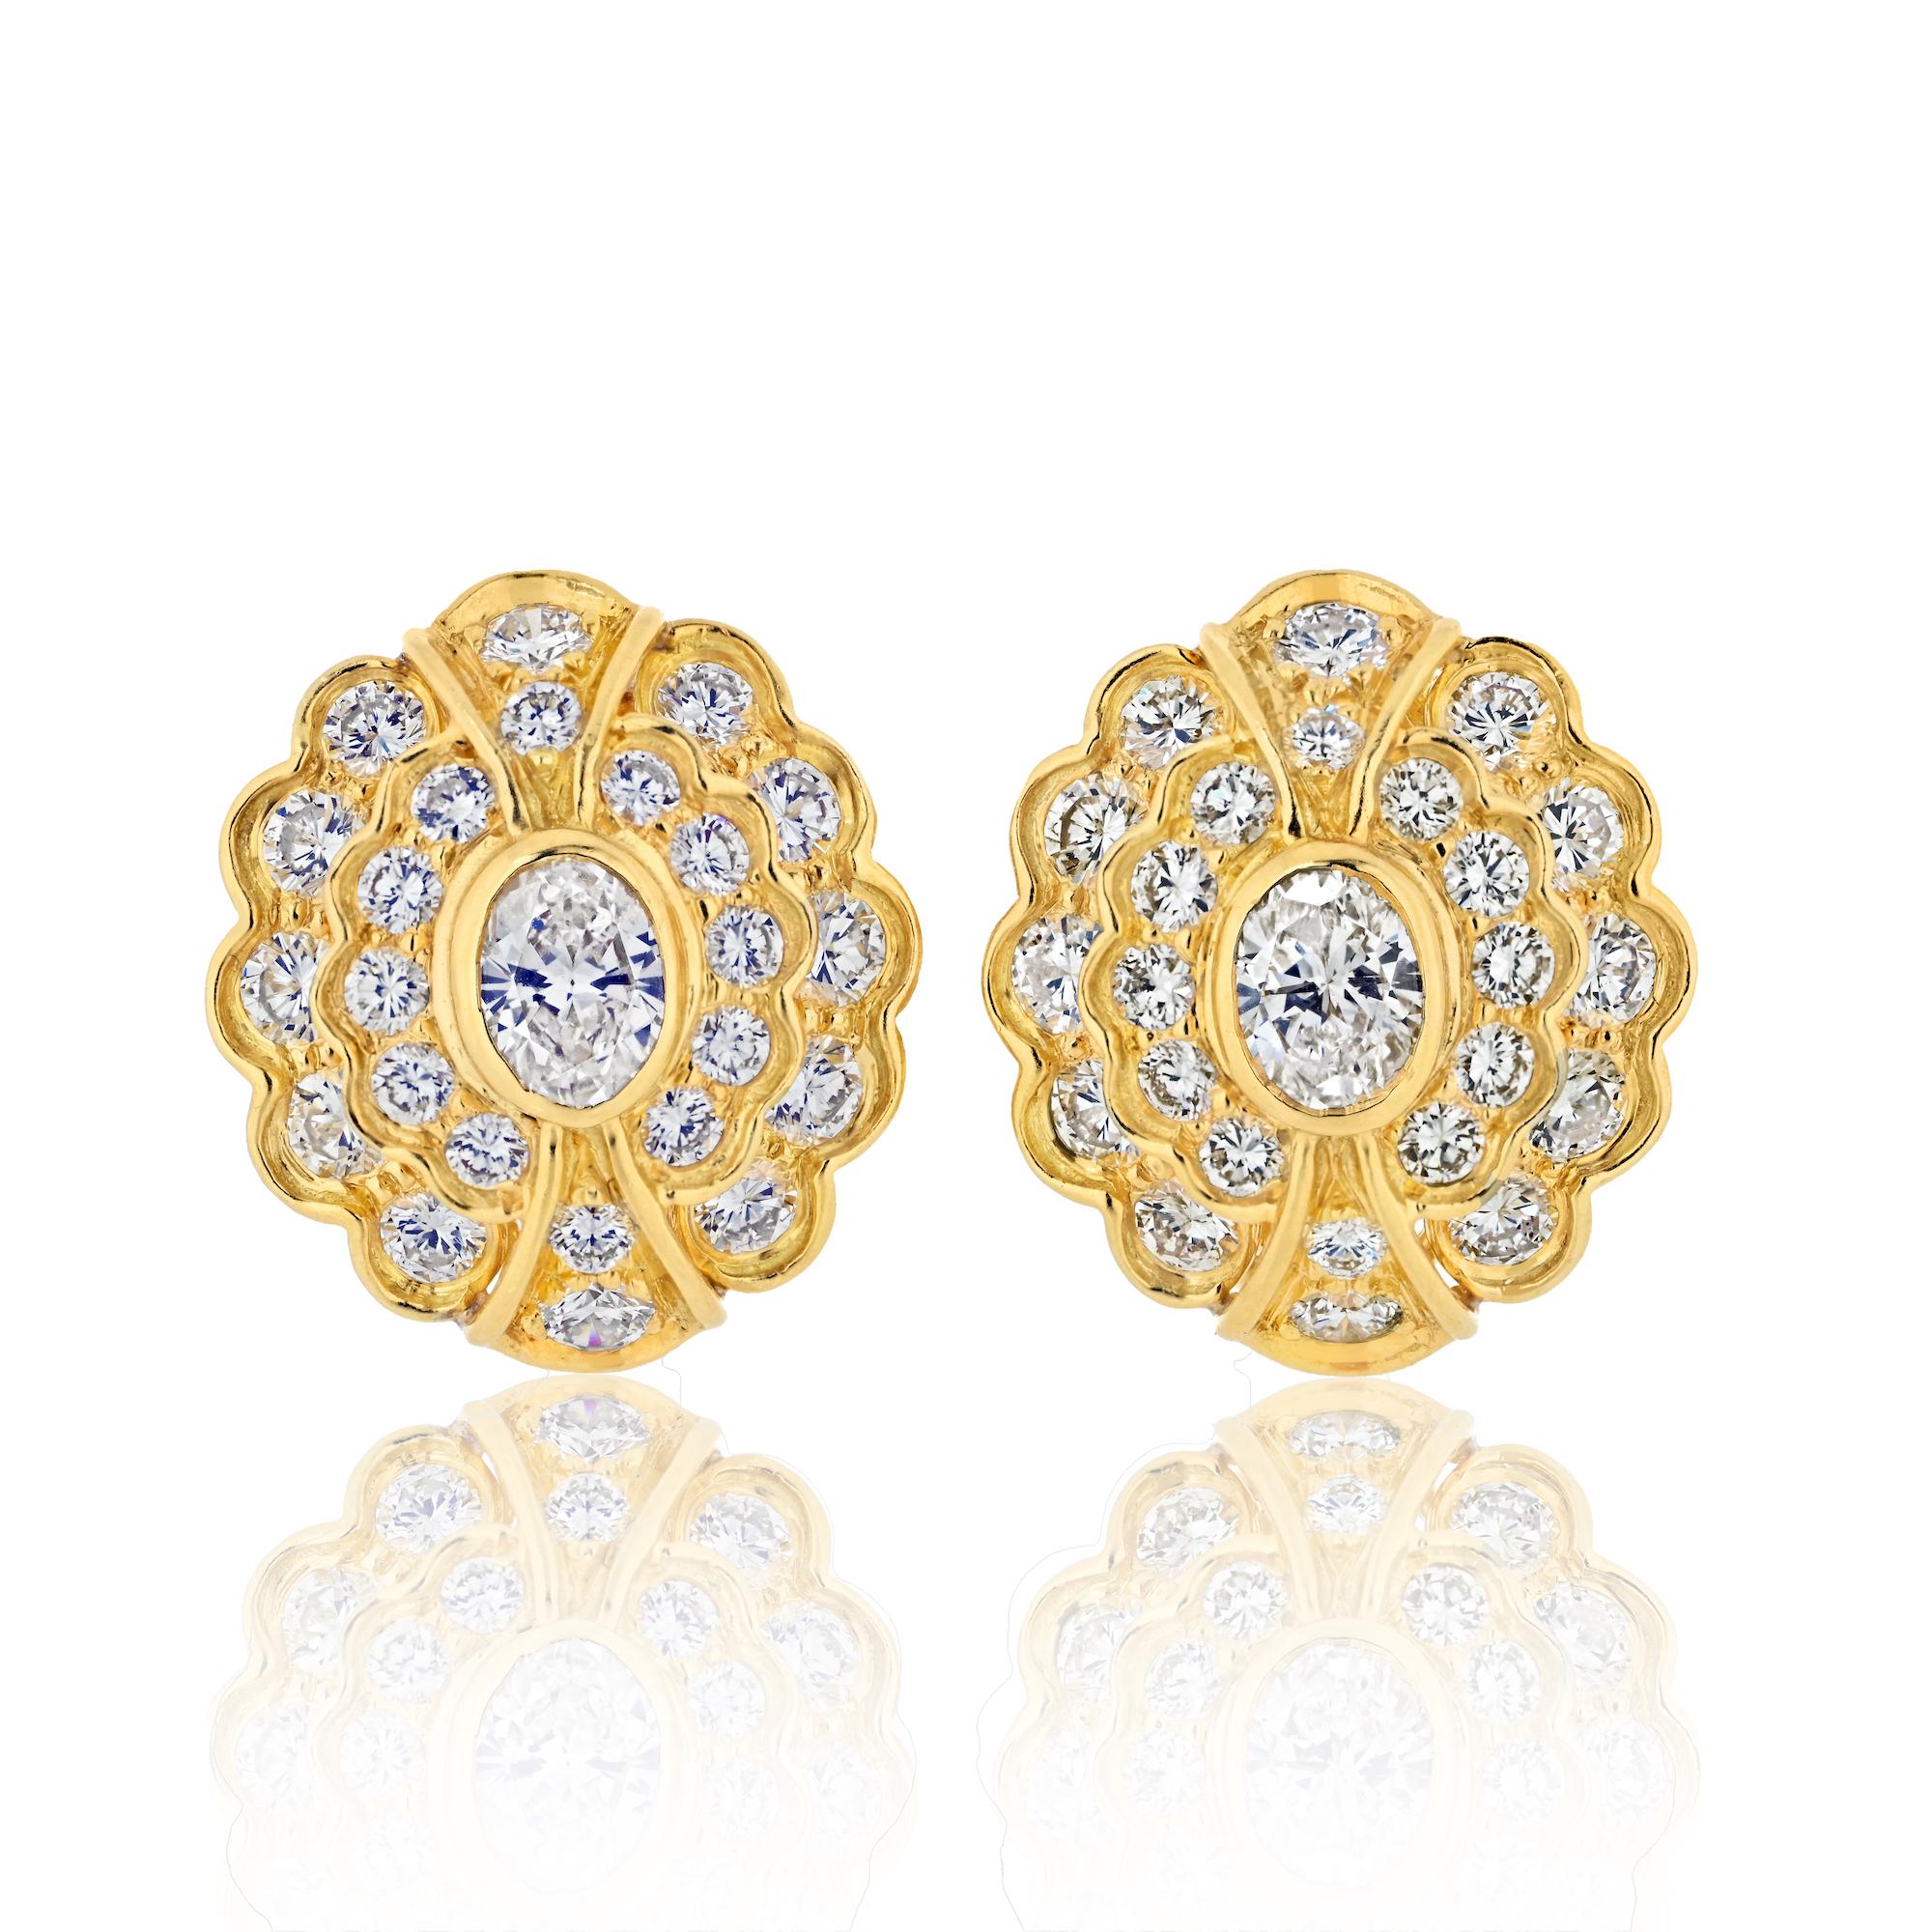 Harry Winston by Jacques Timey
Diamond ear clips in 18k yellow gold. Center of the earrings is bezel set with two oval cut diamonds with total weight of approximately 0.95ct., surrounded by  48 fine quality round brilliant cut diamonds with total